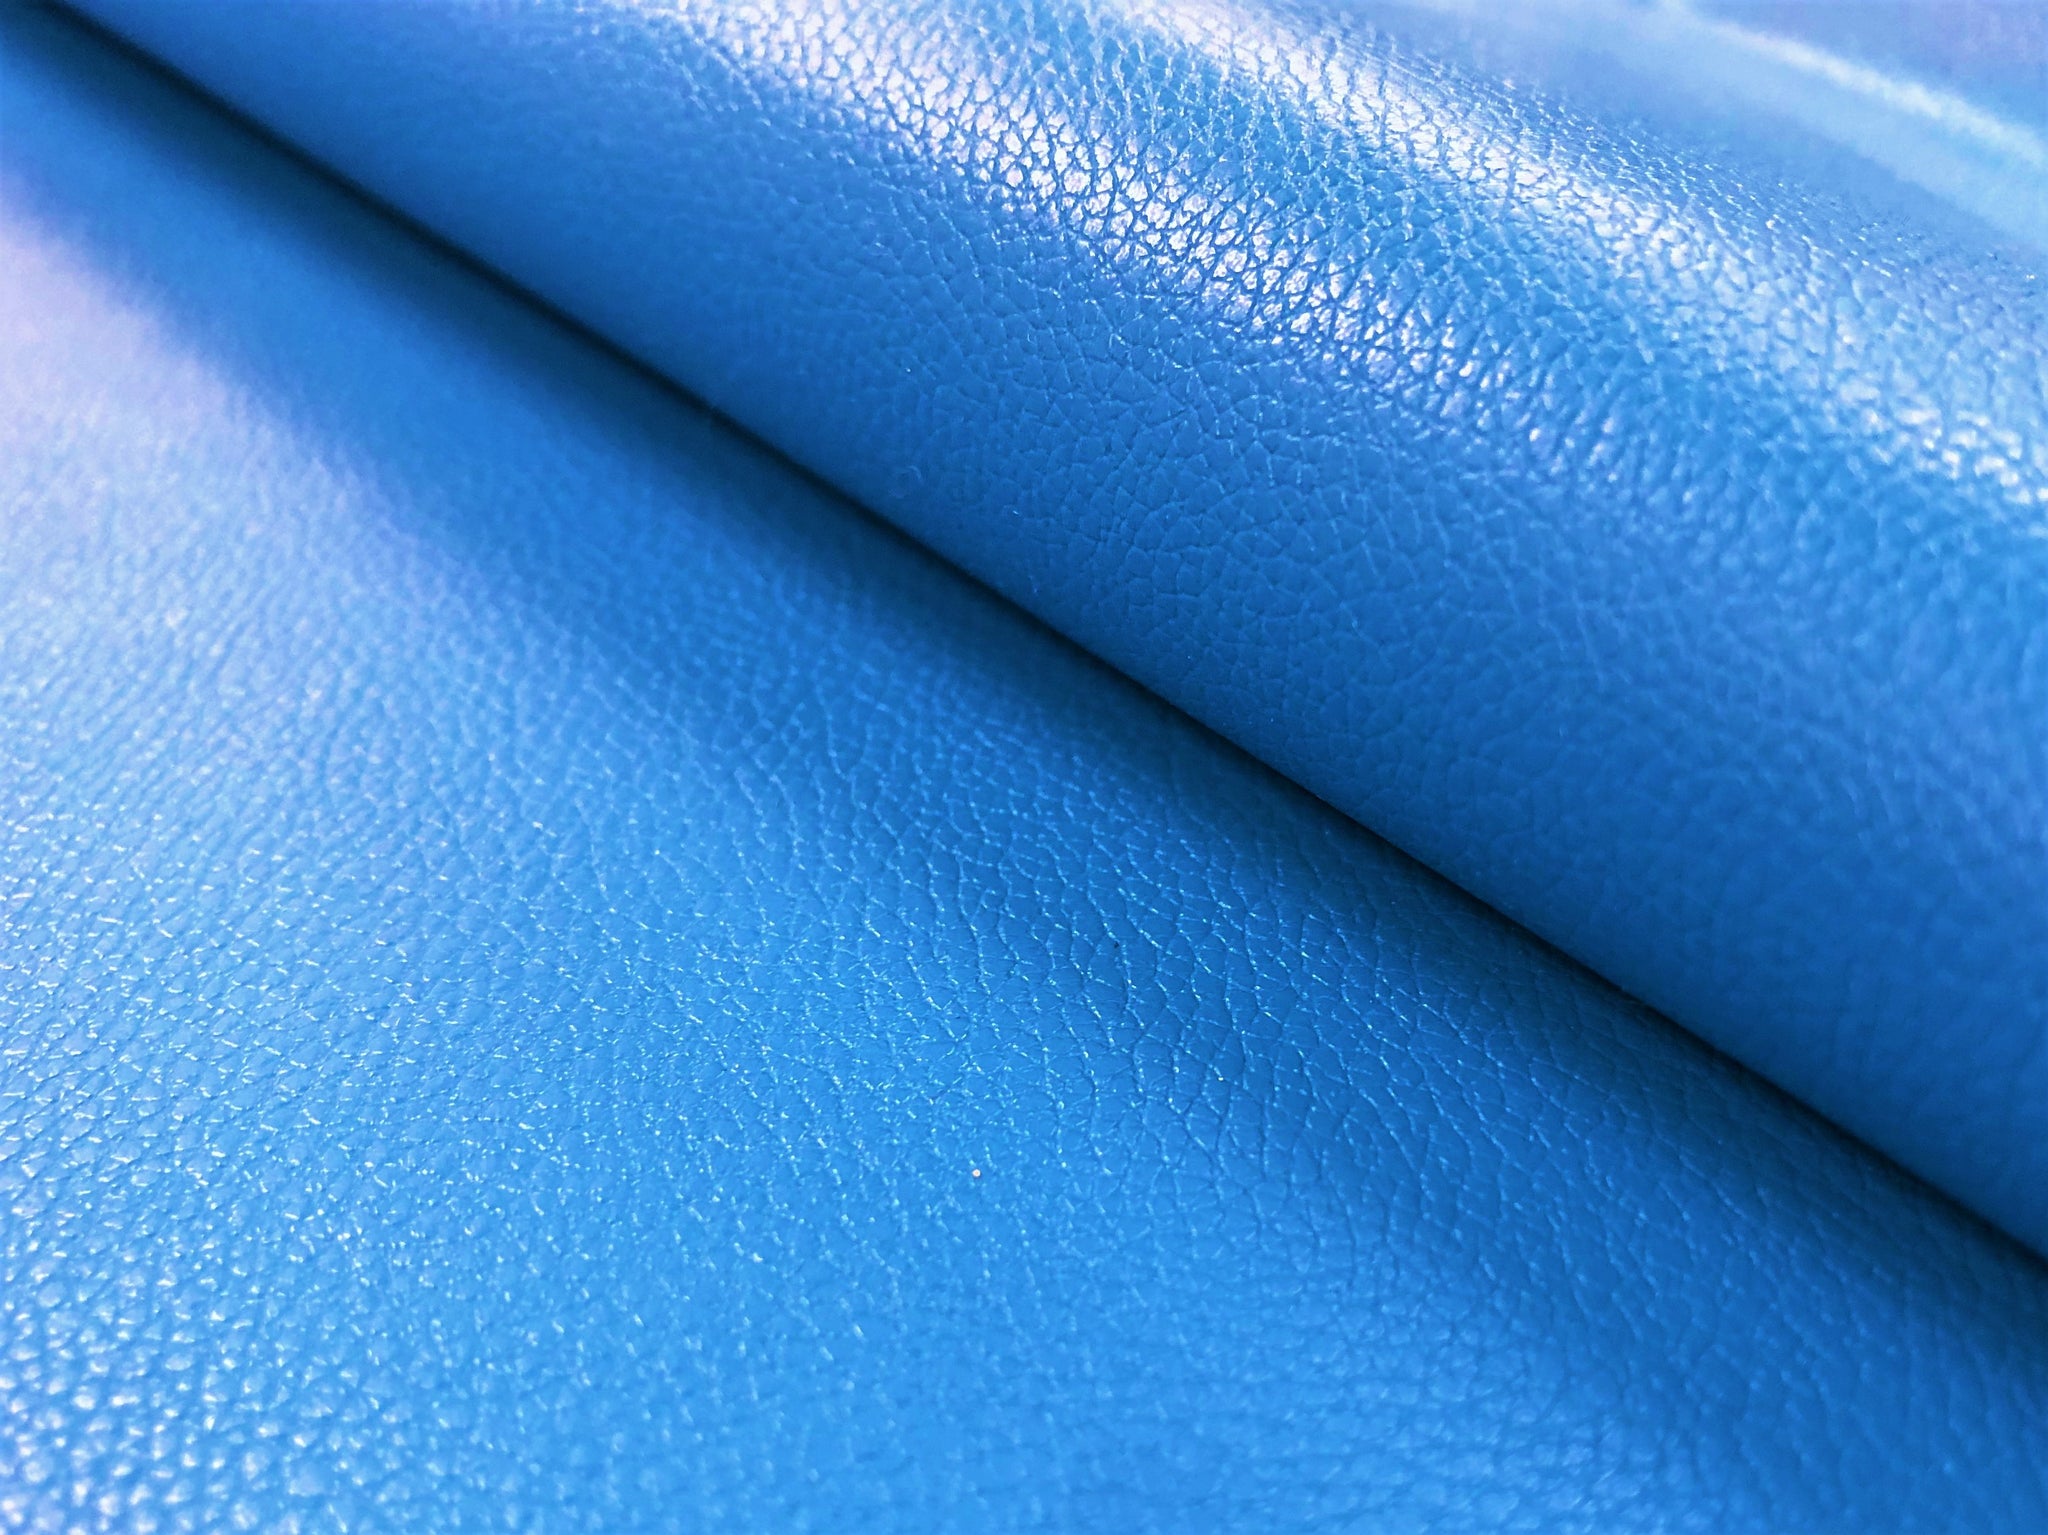 Turquoise Perforated Faux Leather Fabric For Upholstery, Cushions